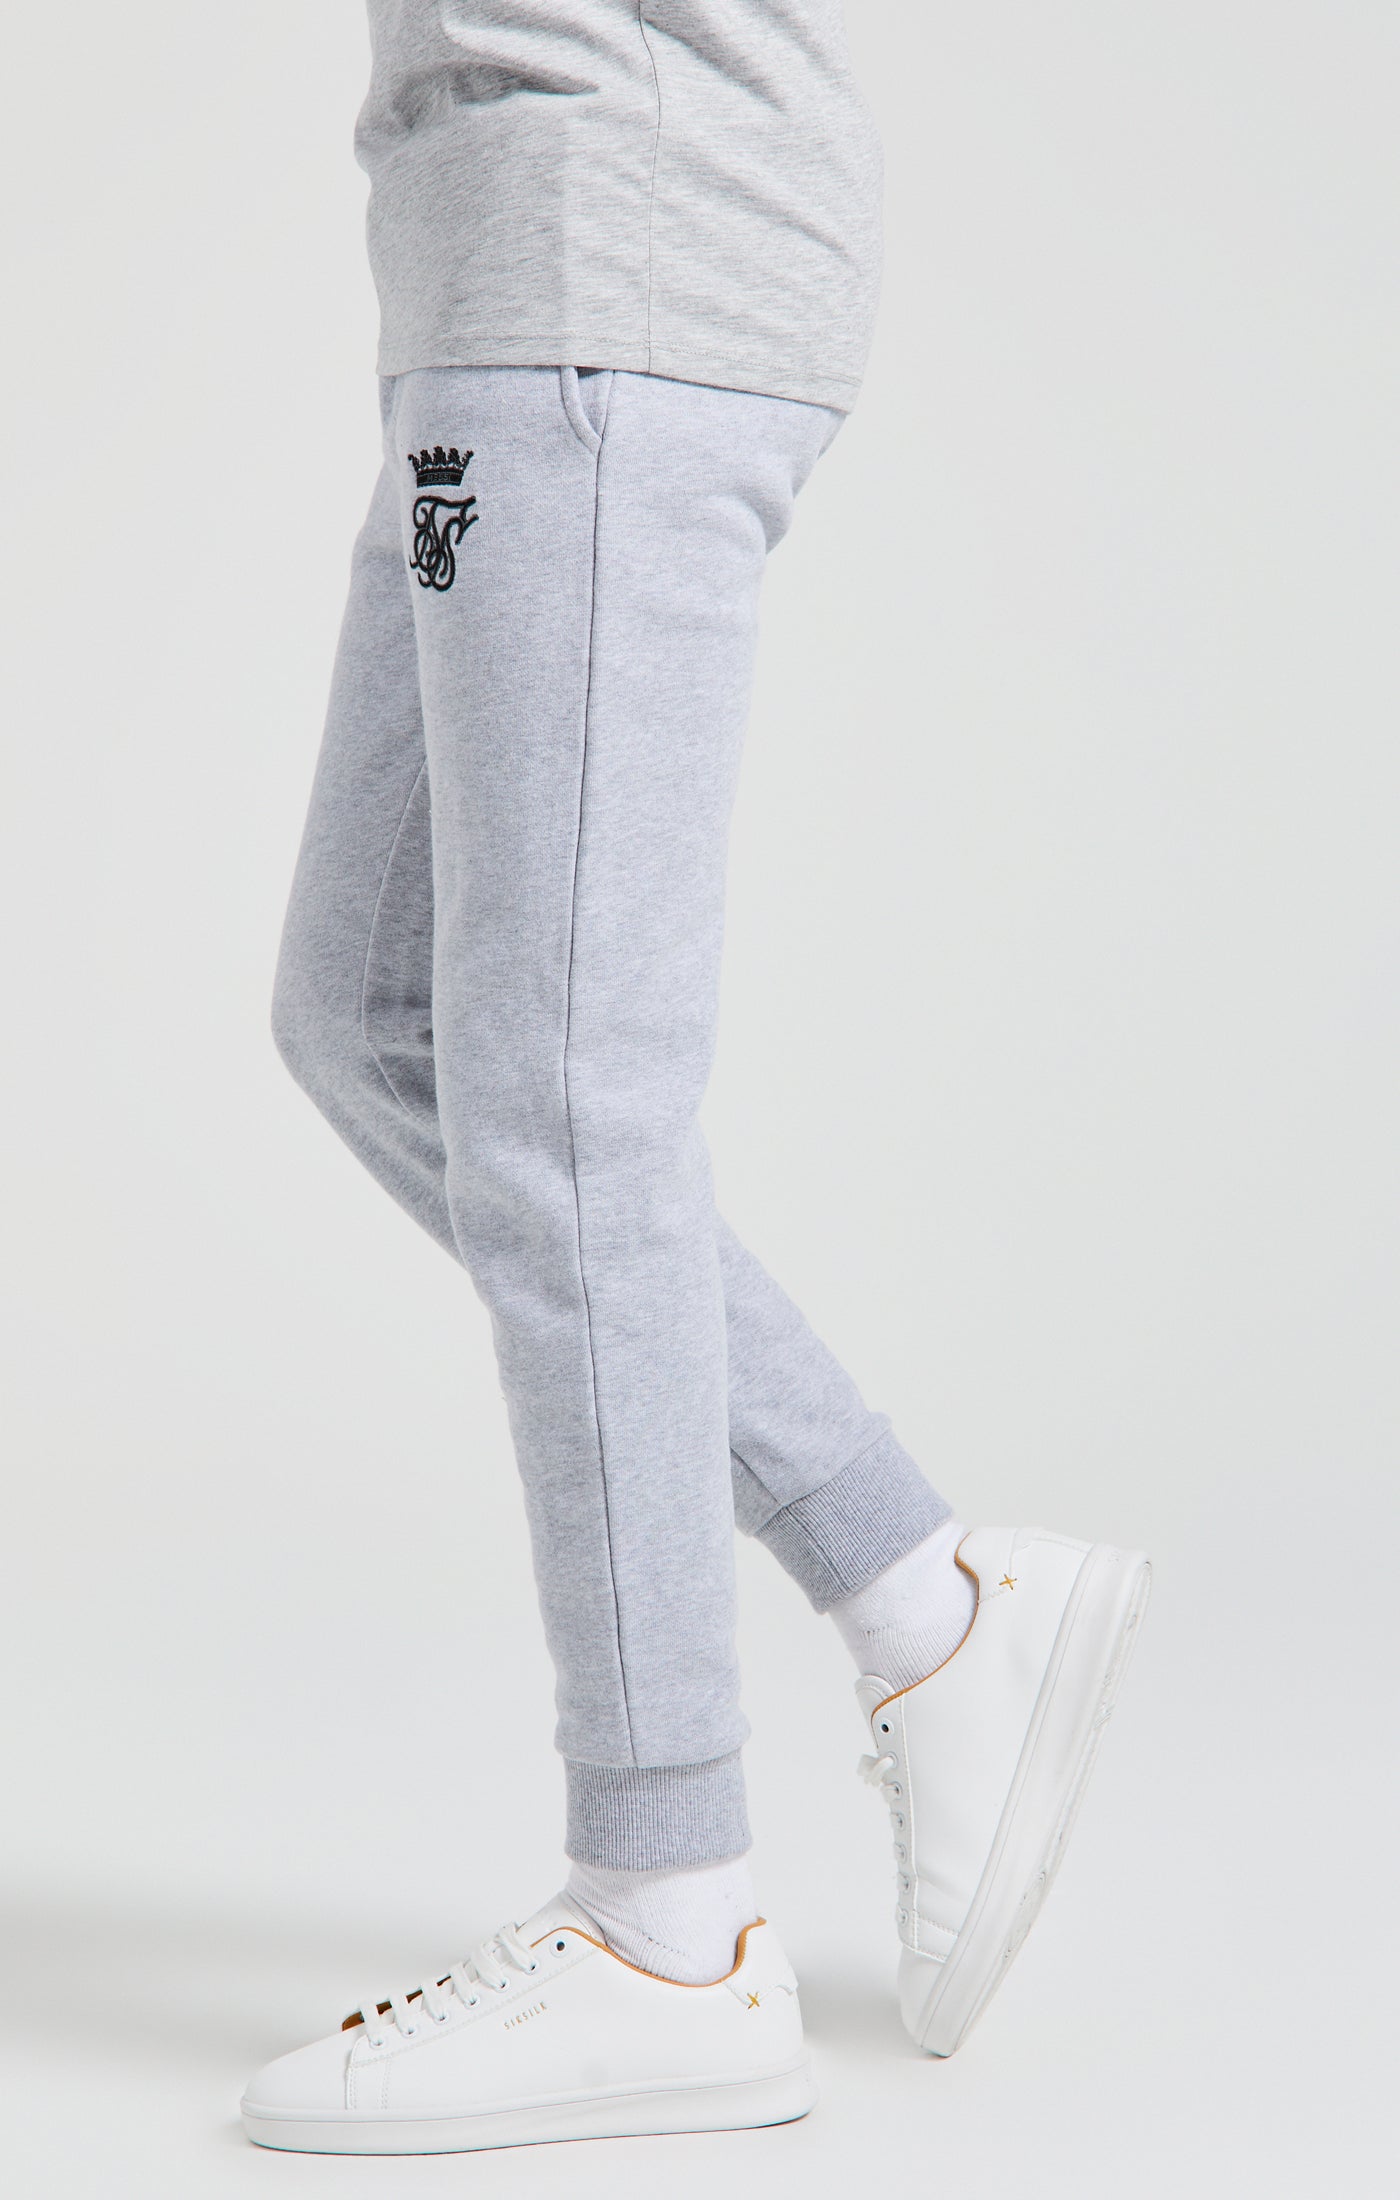 Load image into Gallery viewer, Boys Messi x SikSilk Grey Marl Fleece Pant (2)